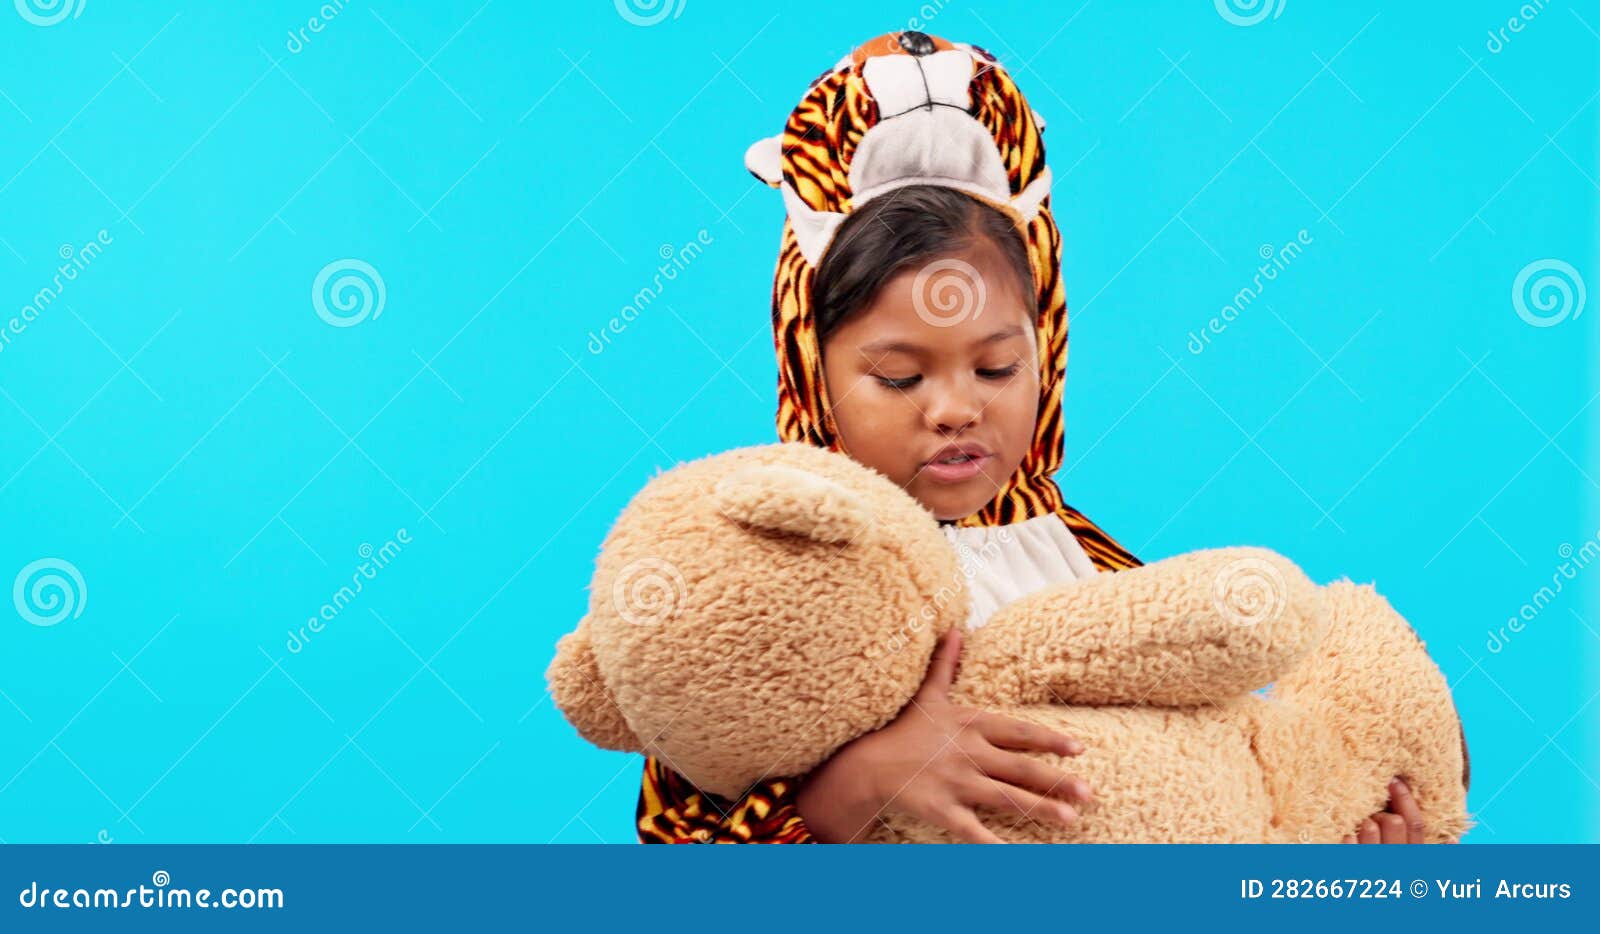 Kids, Teddy Bear and Pajamas with a Girl at Bedtime on a Blue ...